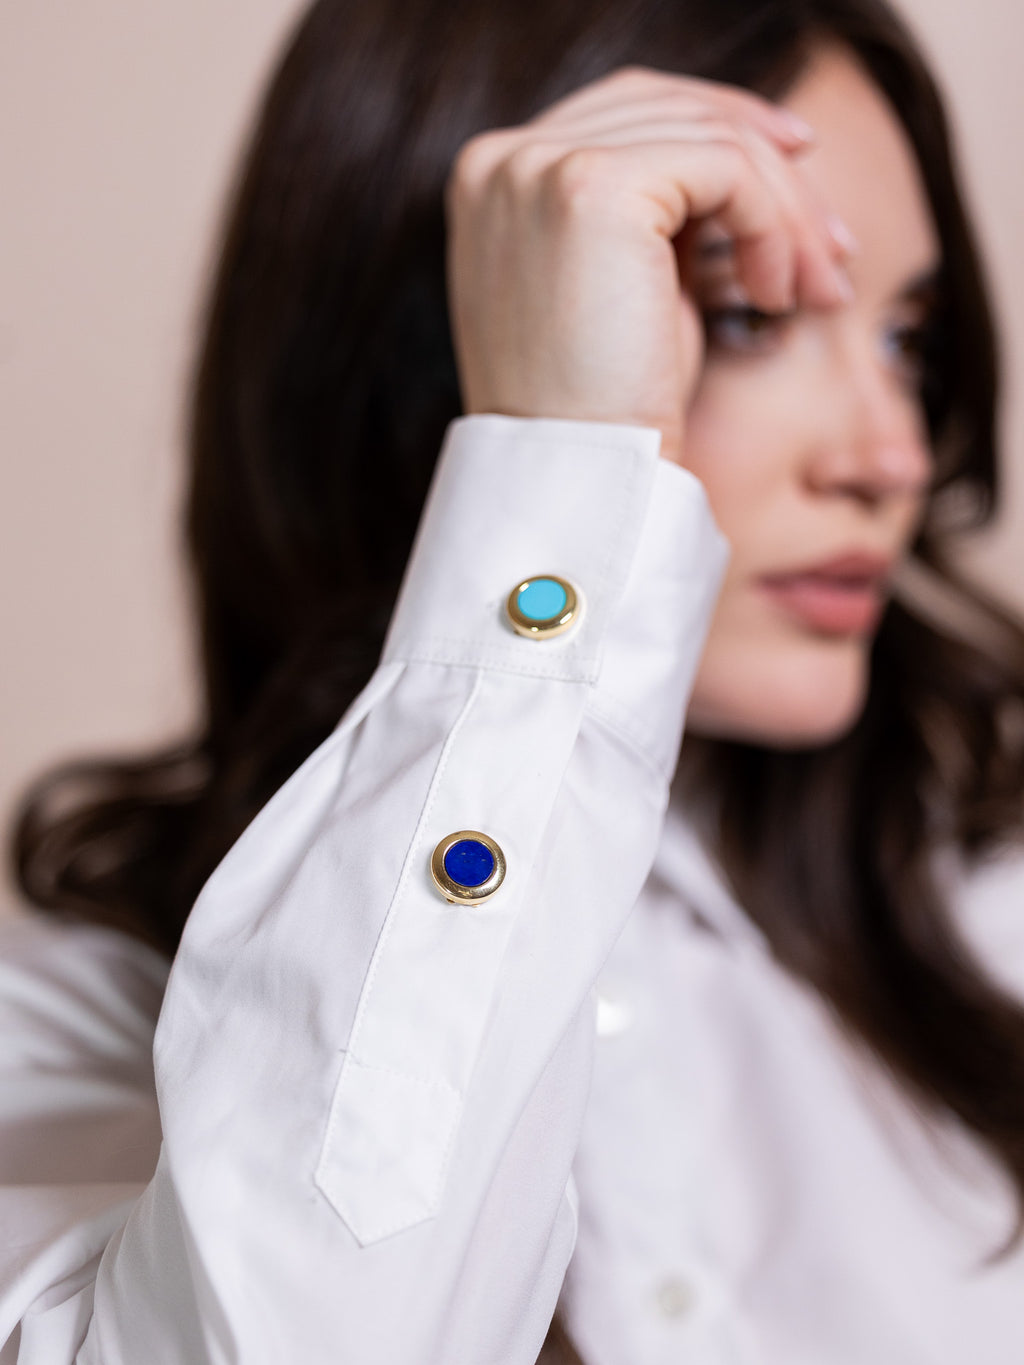 Lapus lazuli and gold button cover on white shirt.